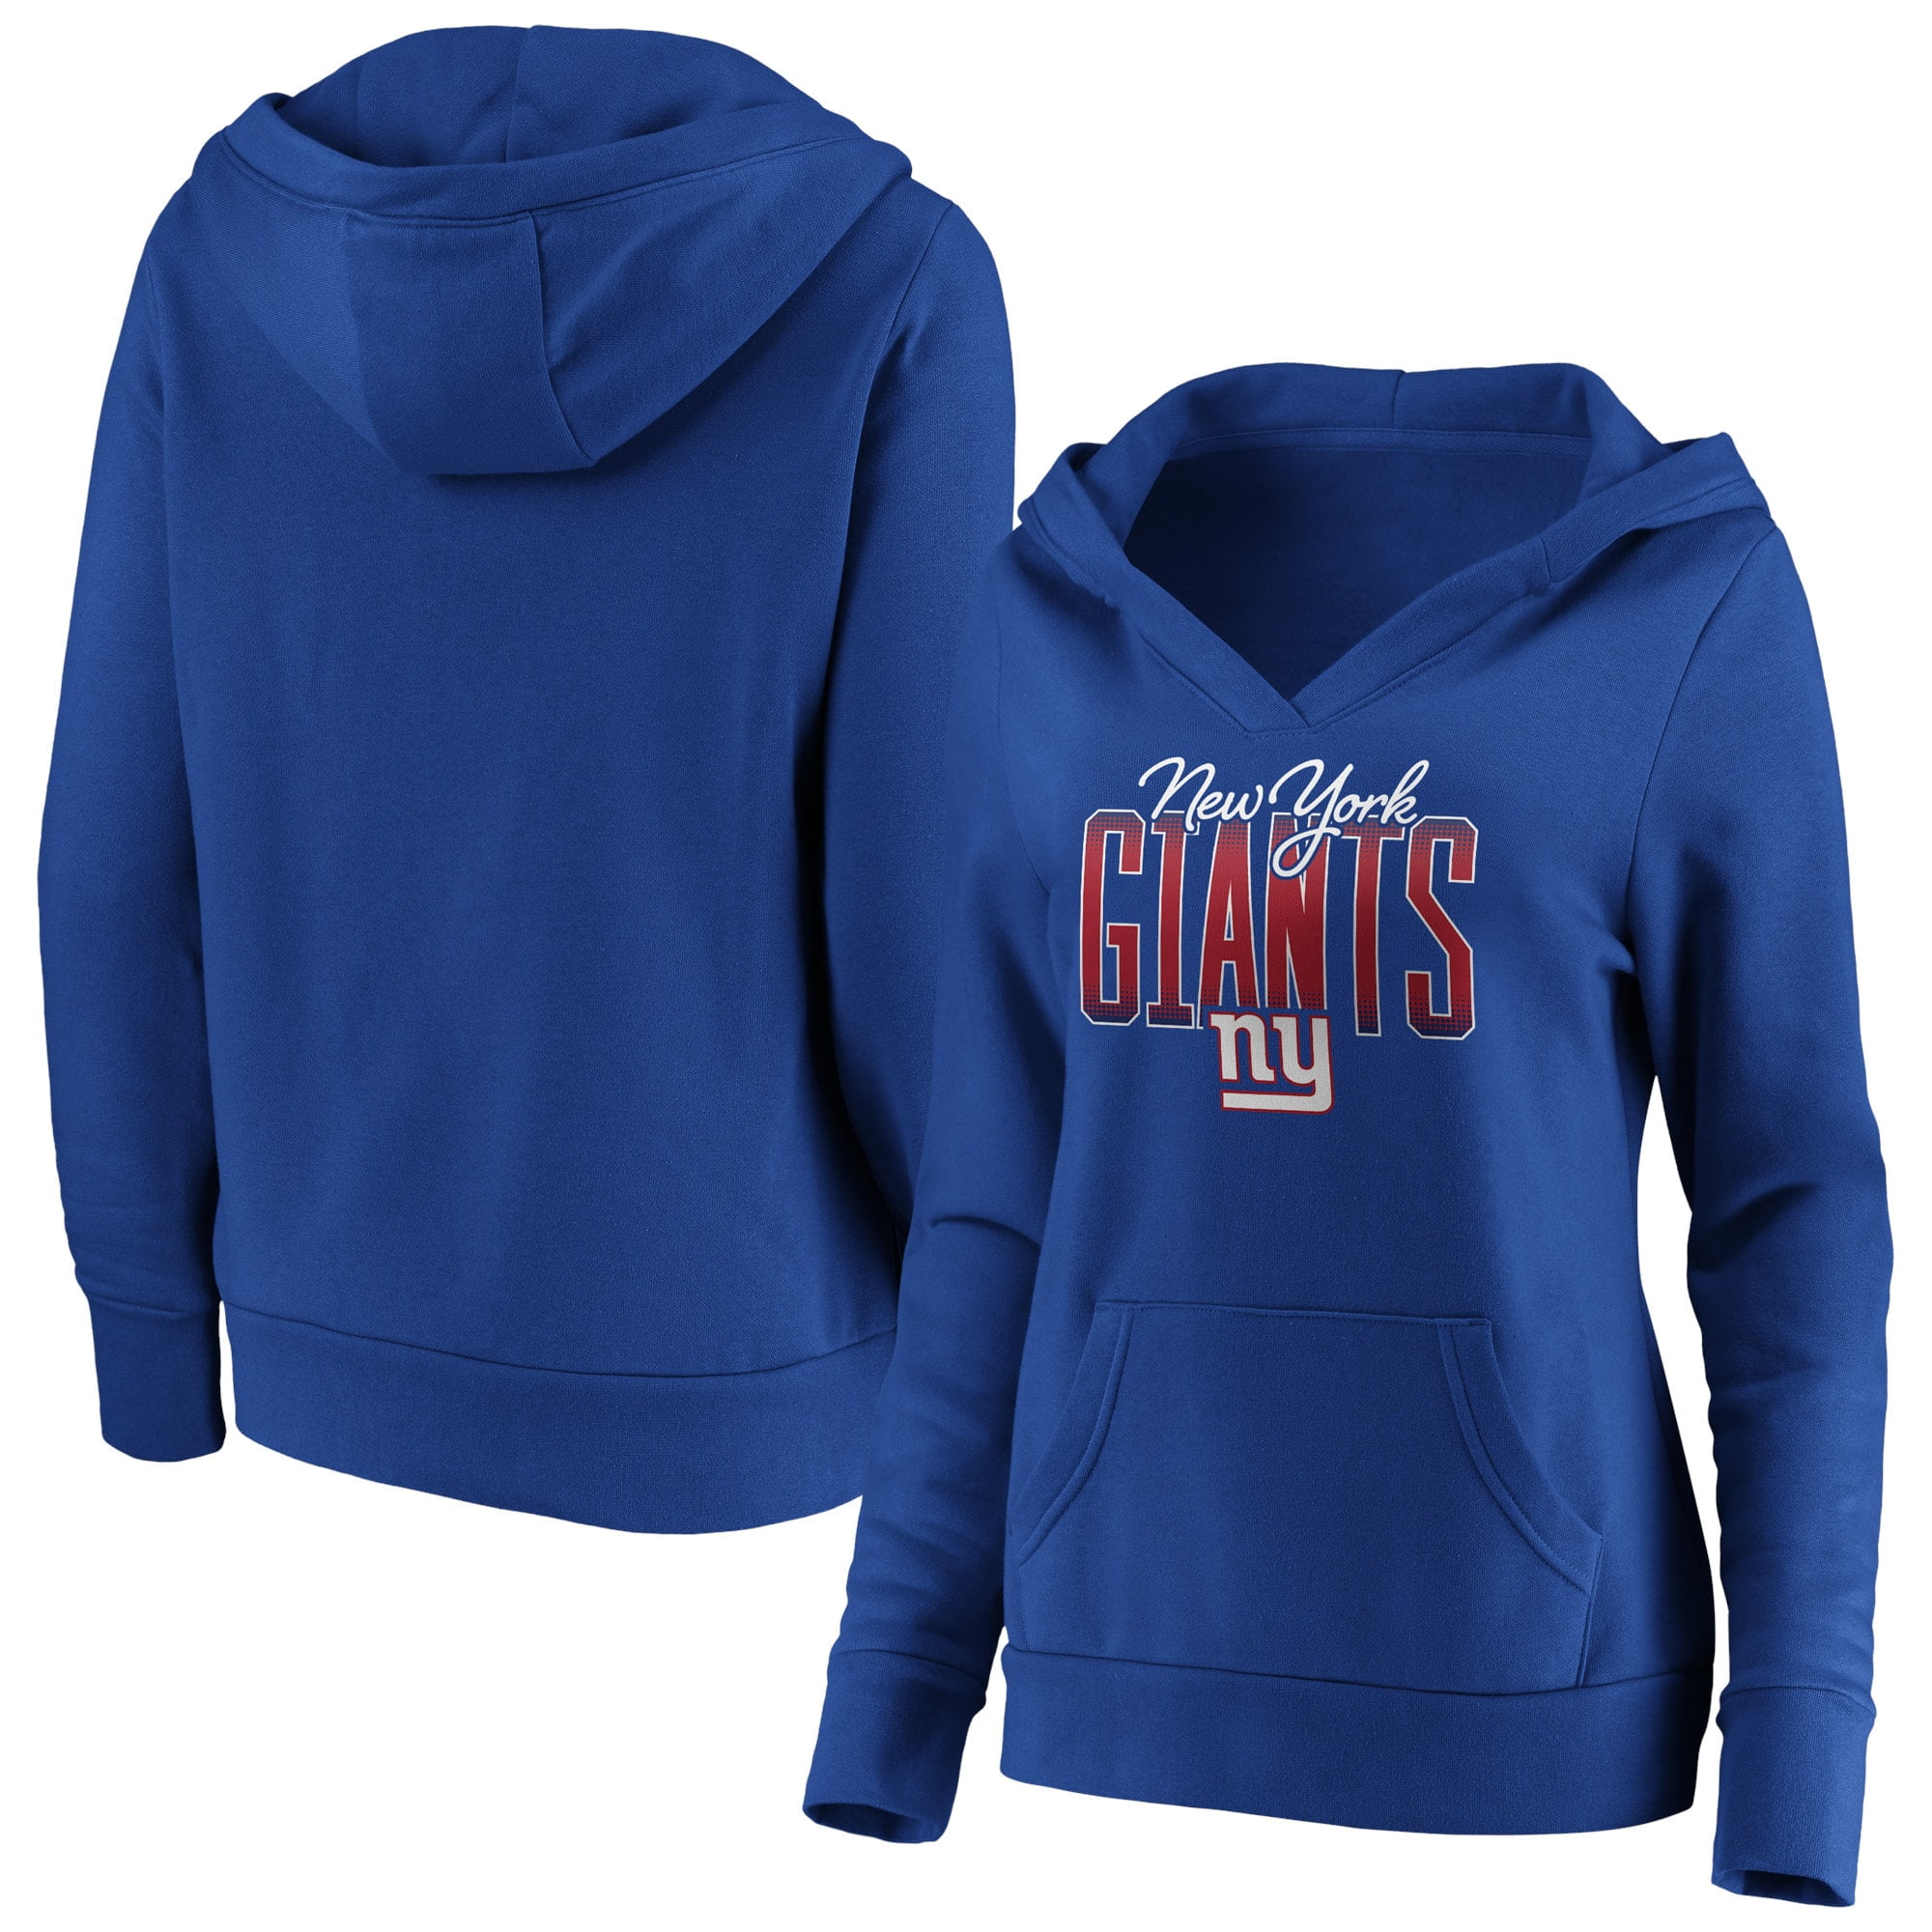 Color : Blue, Size : S Mens Casual Sweatshirt for New York Giants Football Fan Jersey Outdoor Pullover Poly Fleece Hoodie Drawstring Full Zip 